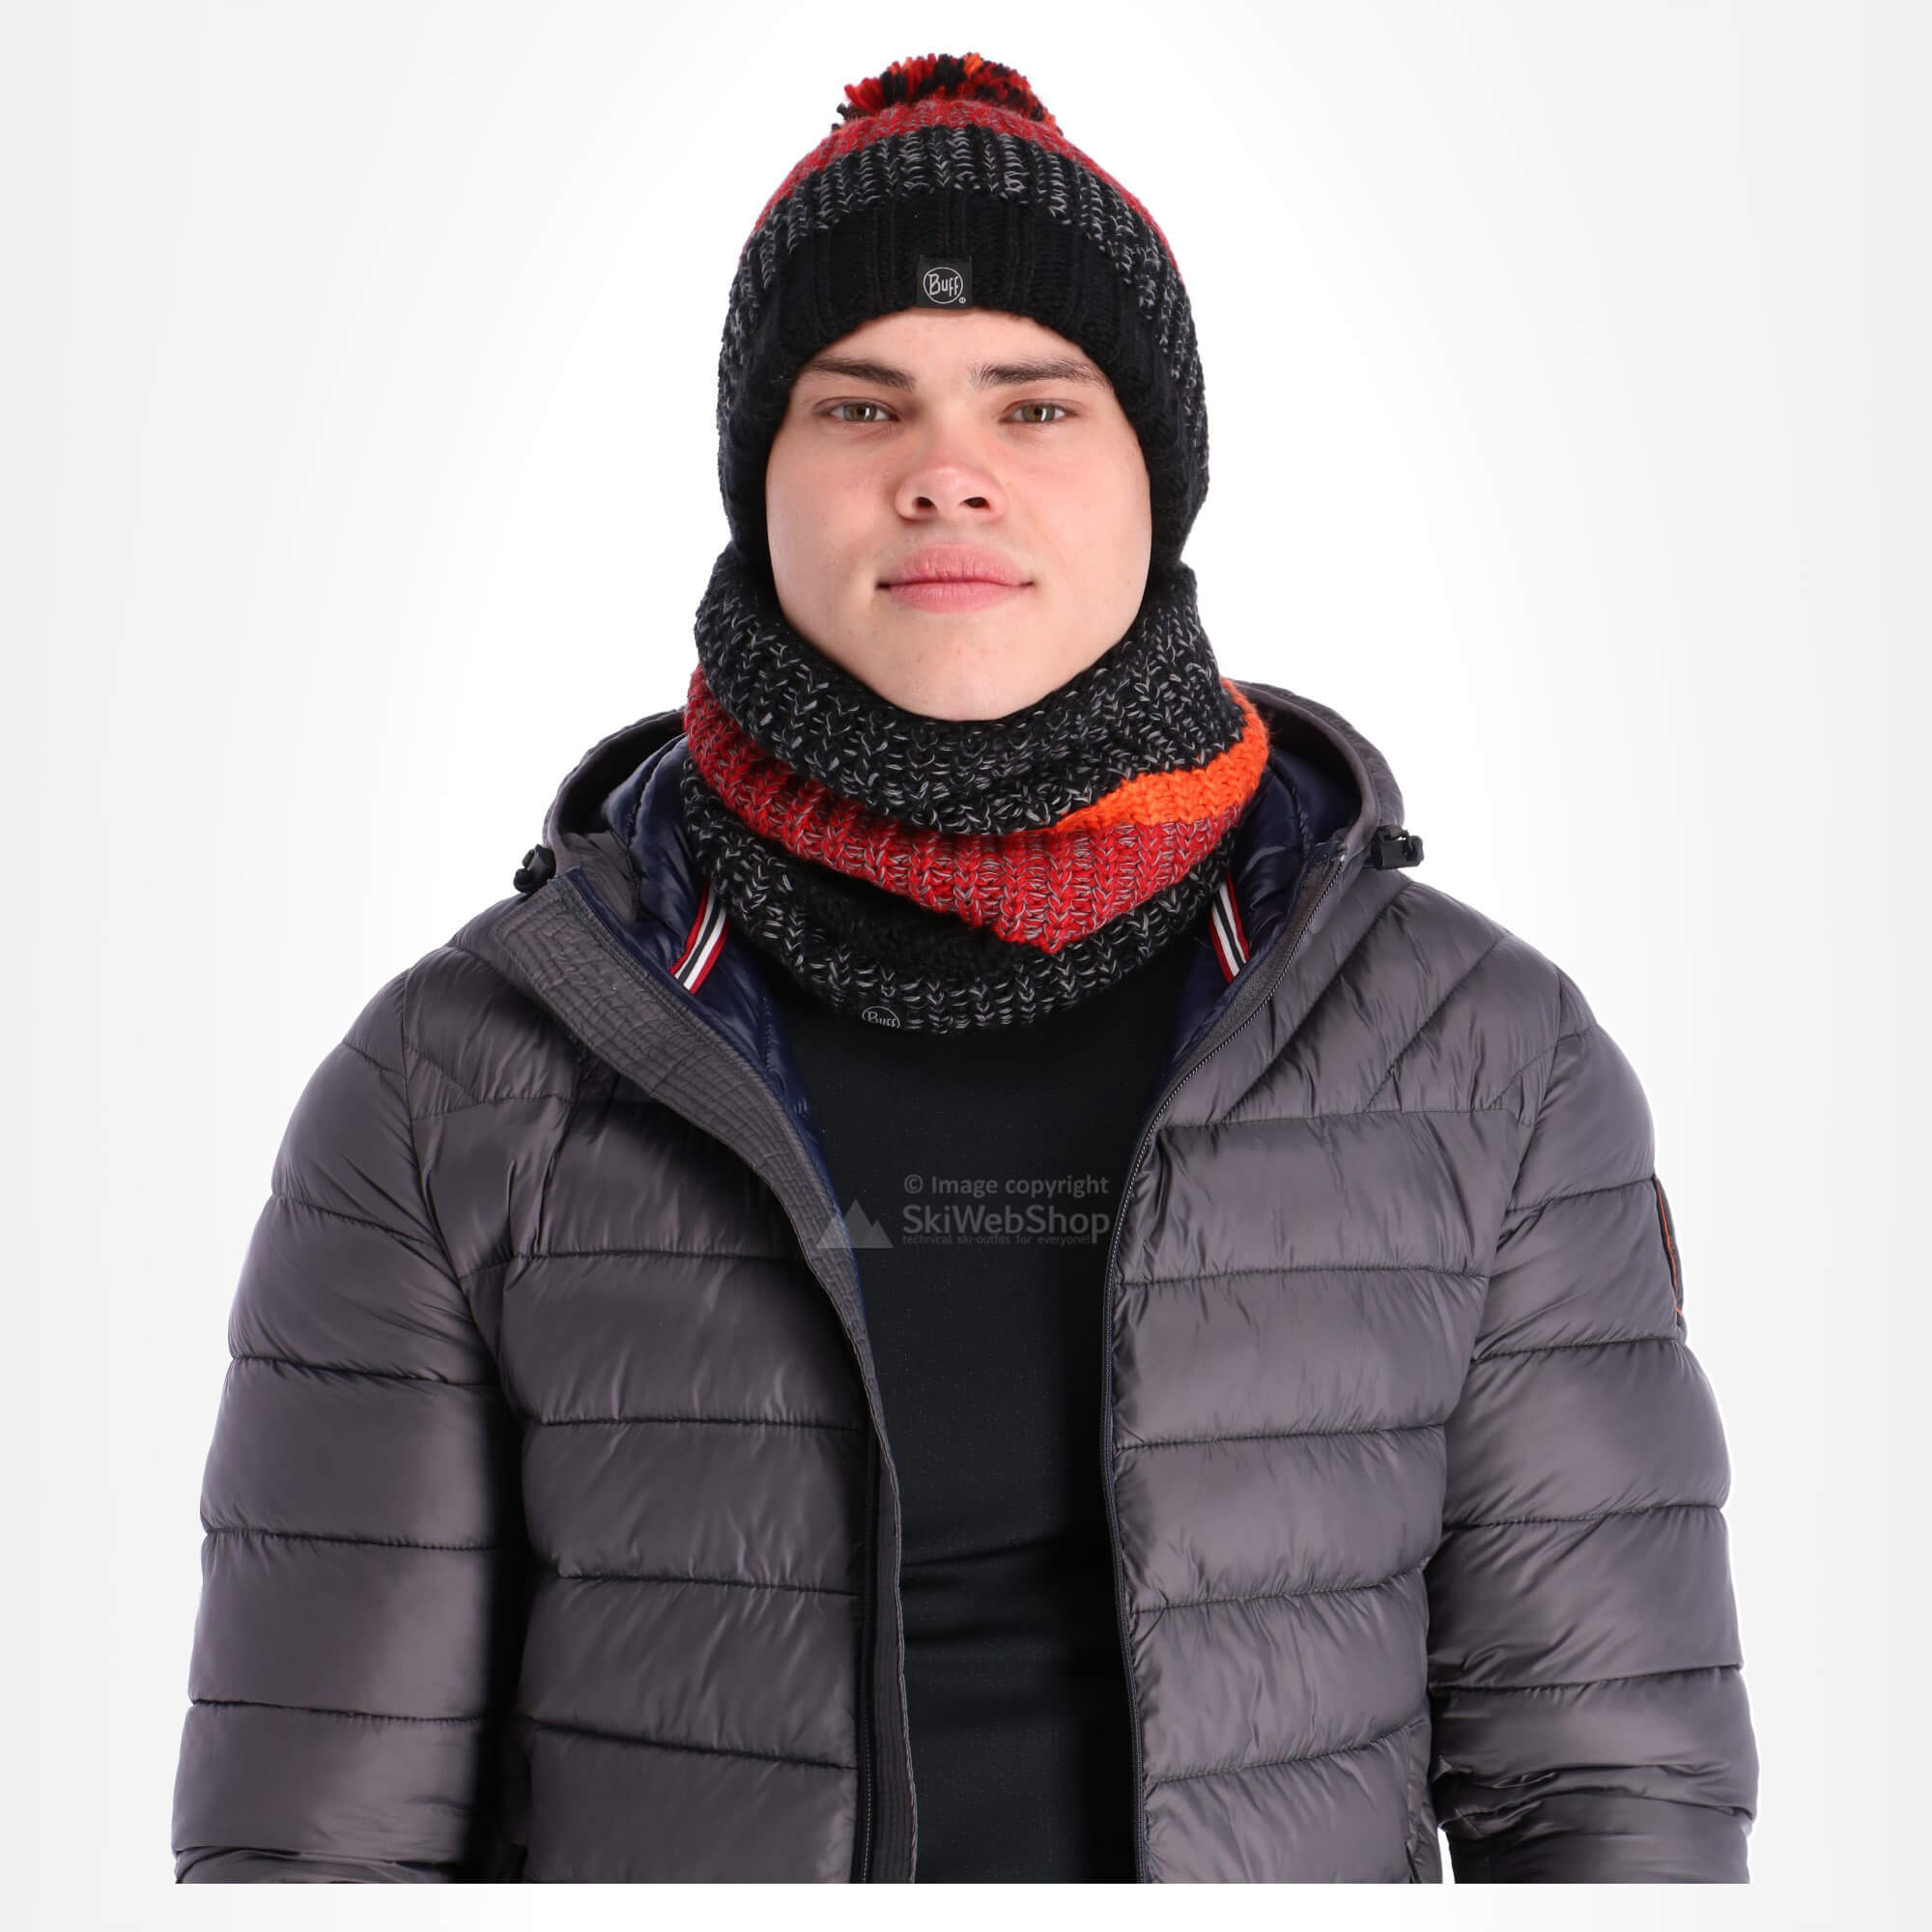 men's winter hats for large heads